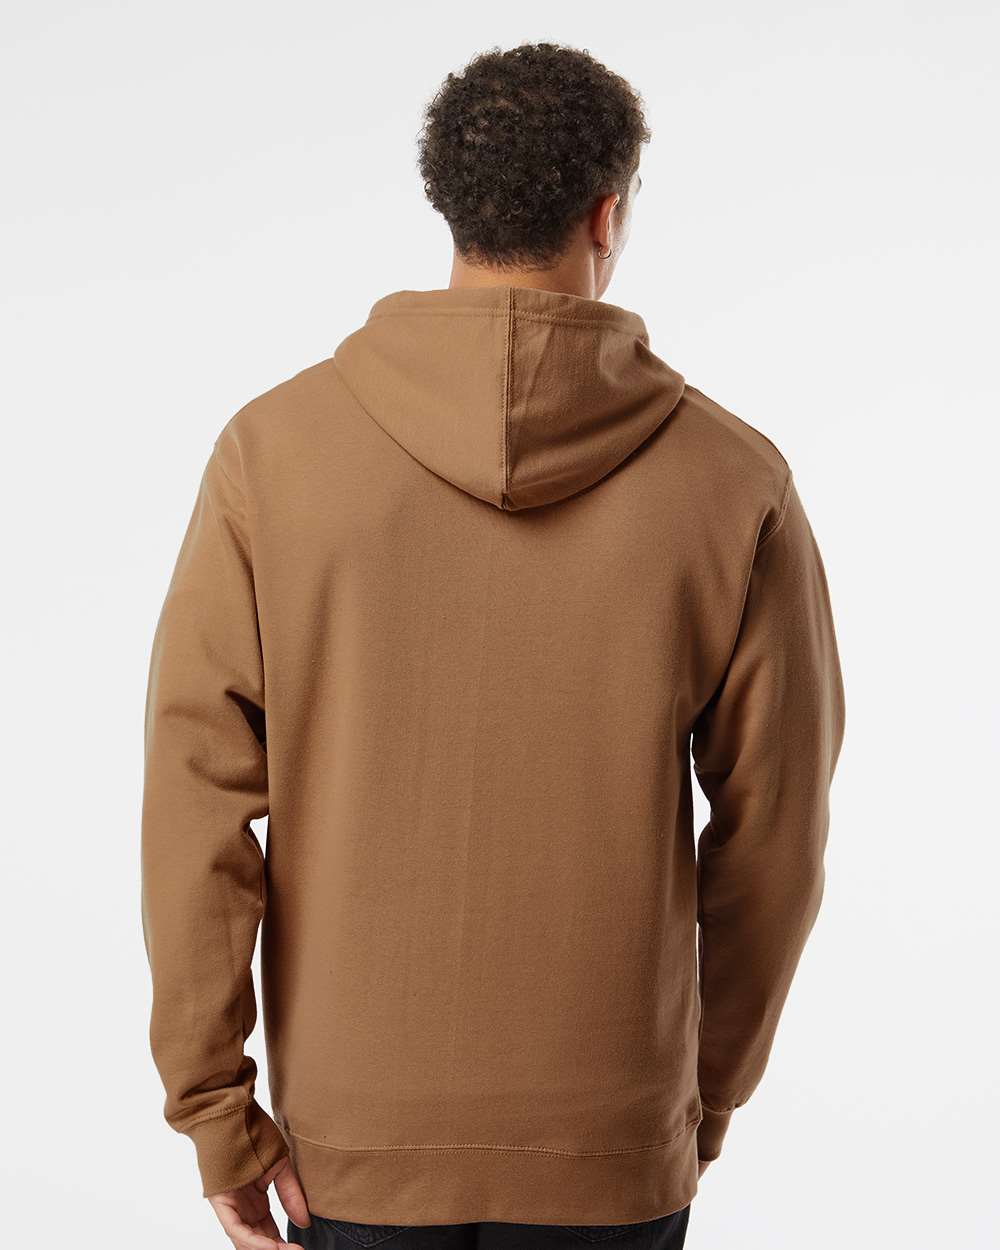 Independent Trading Co. Midweight Hooded Sweatshirt SS4500 #colormdl_Saddle